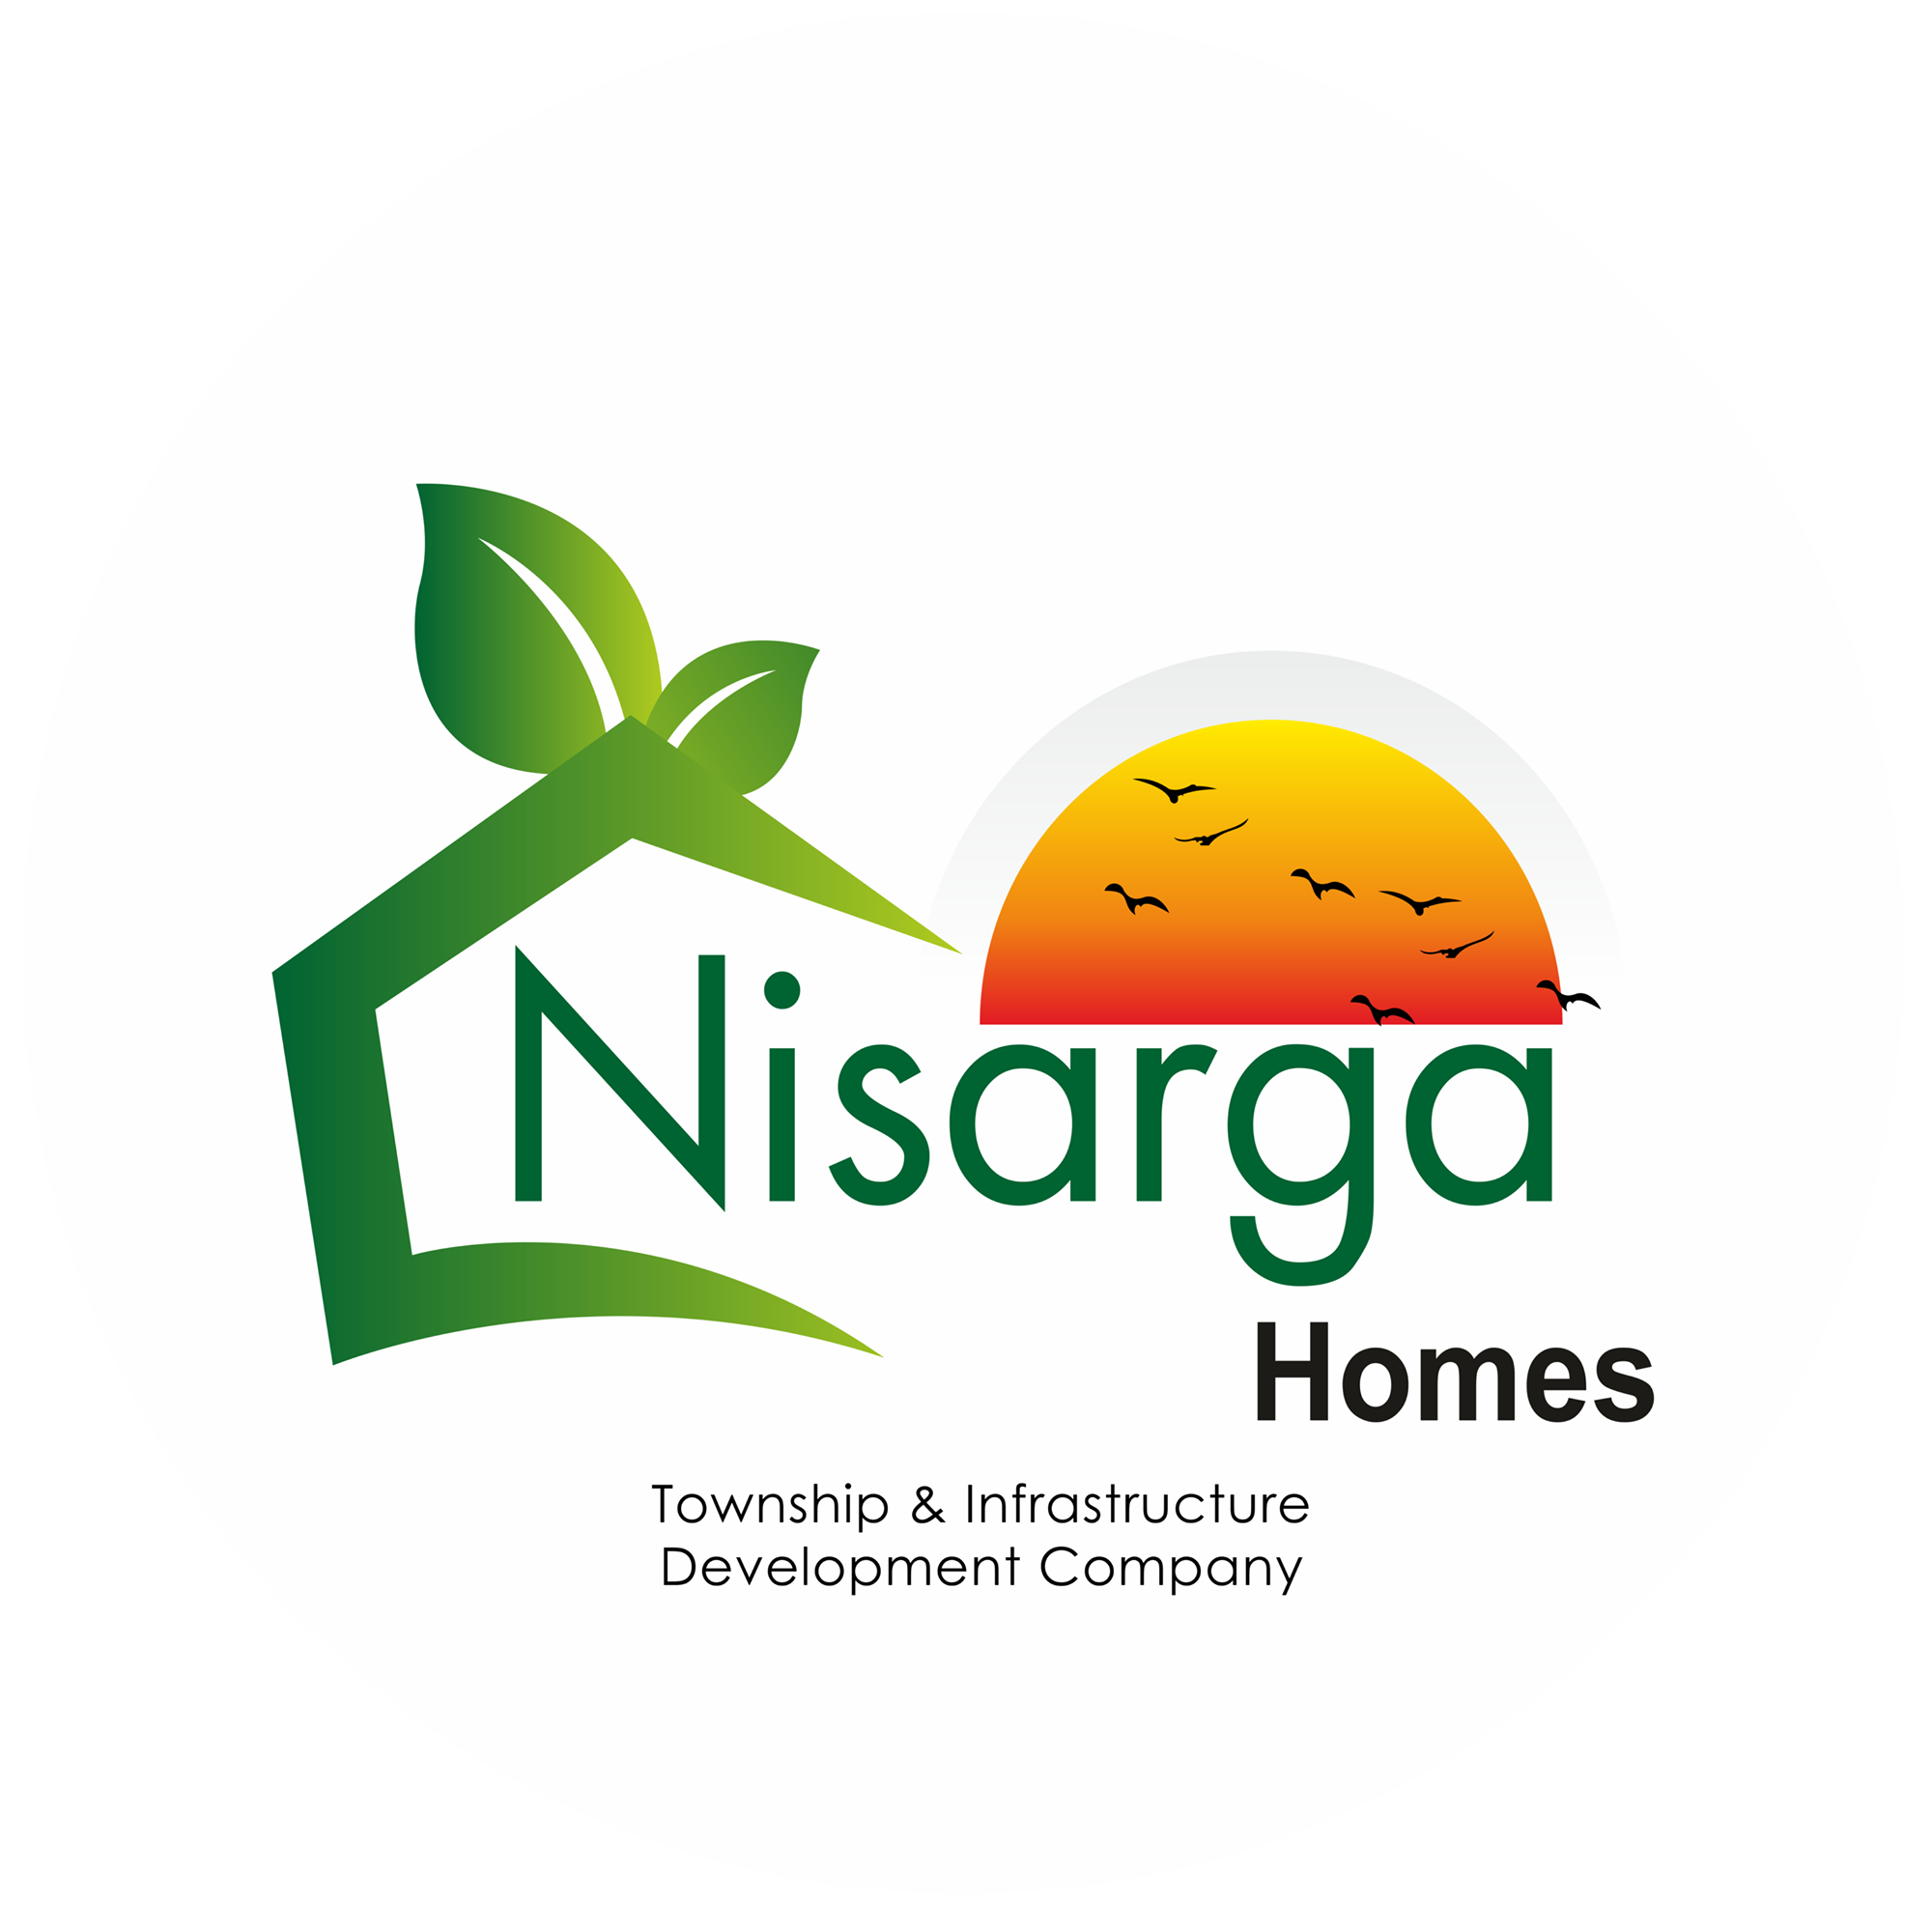 Nisarga Homes (Branch Office)|Legal Services|Professional Services